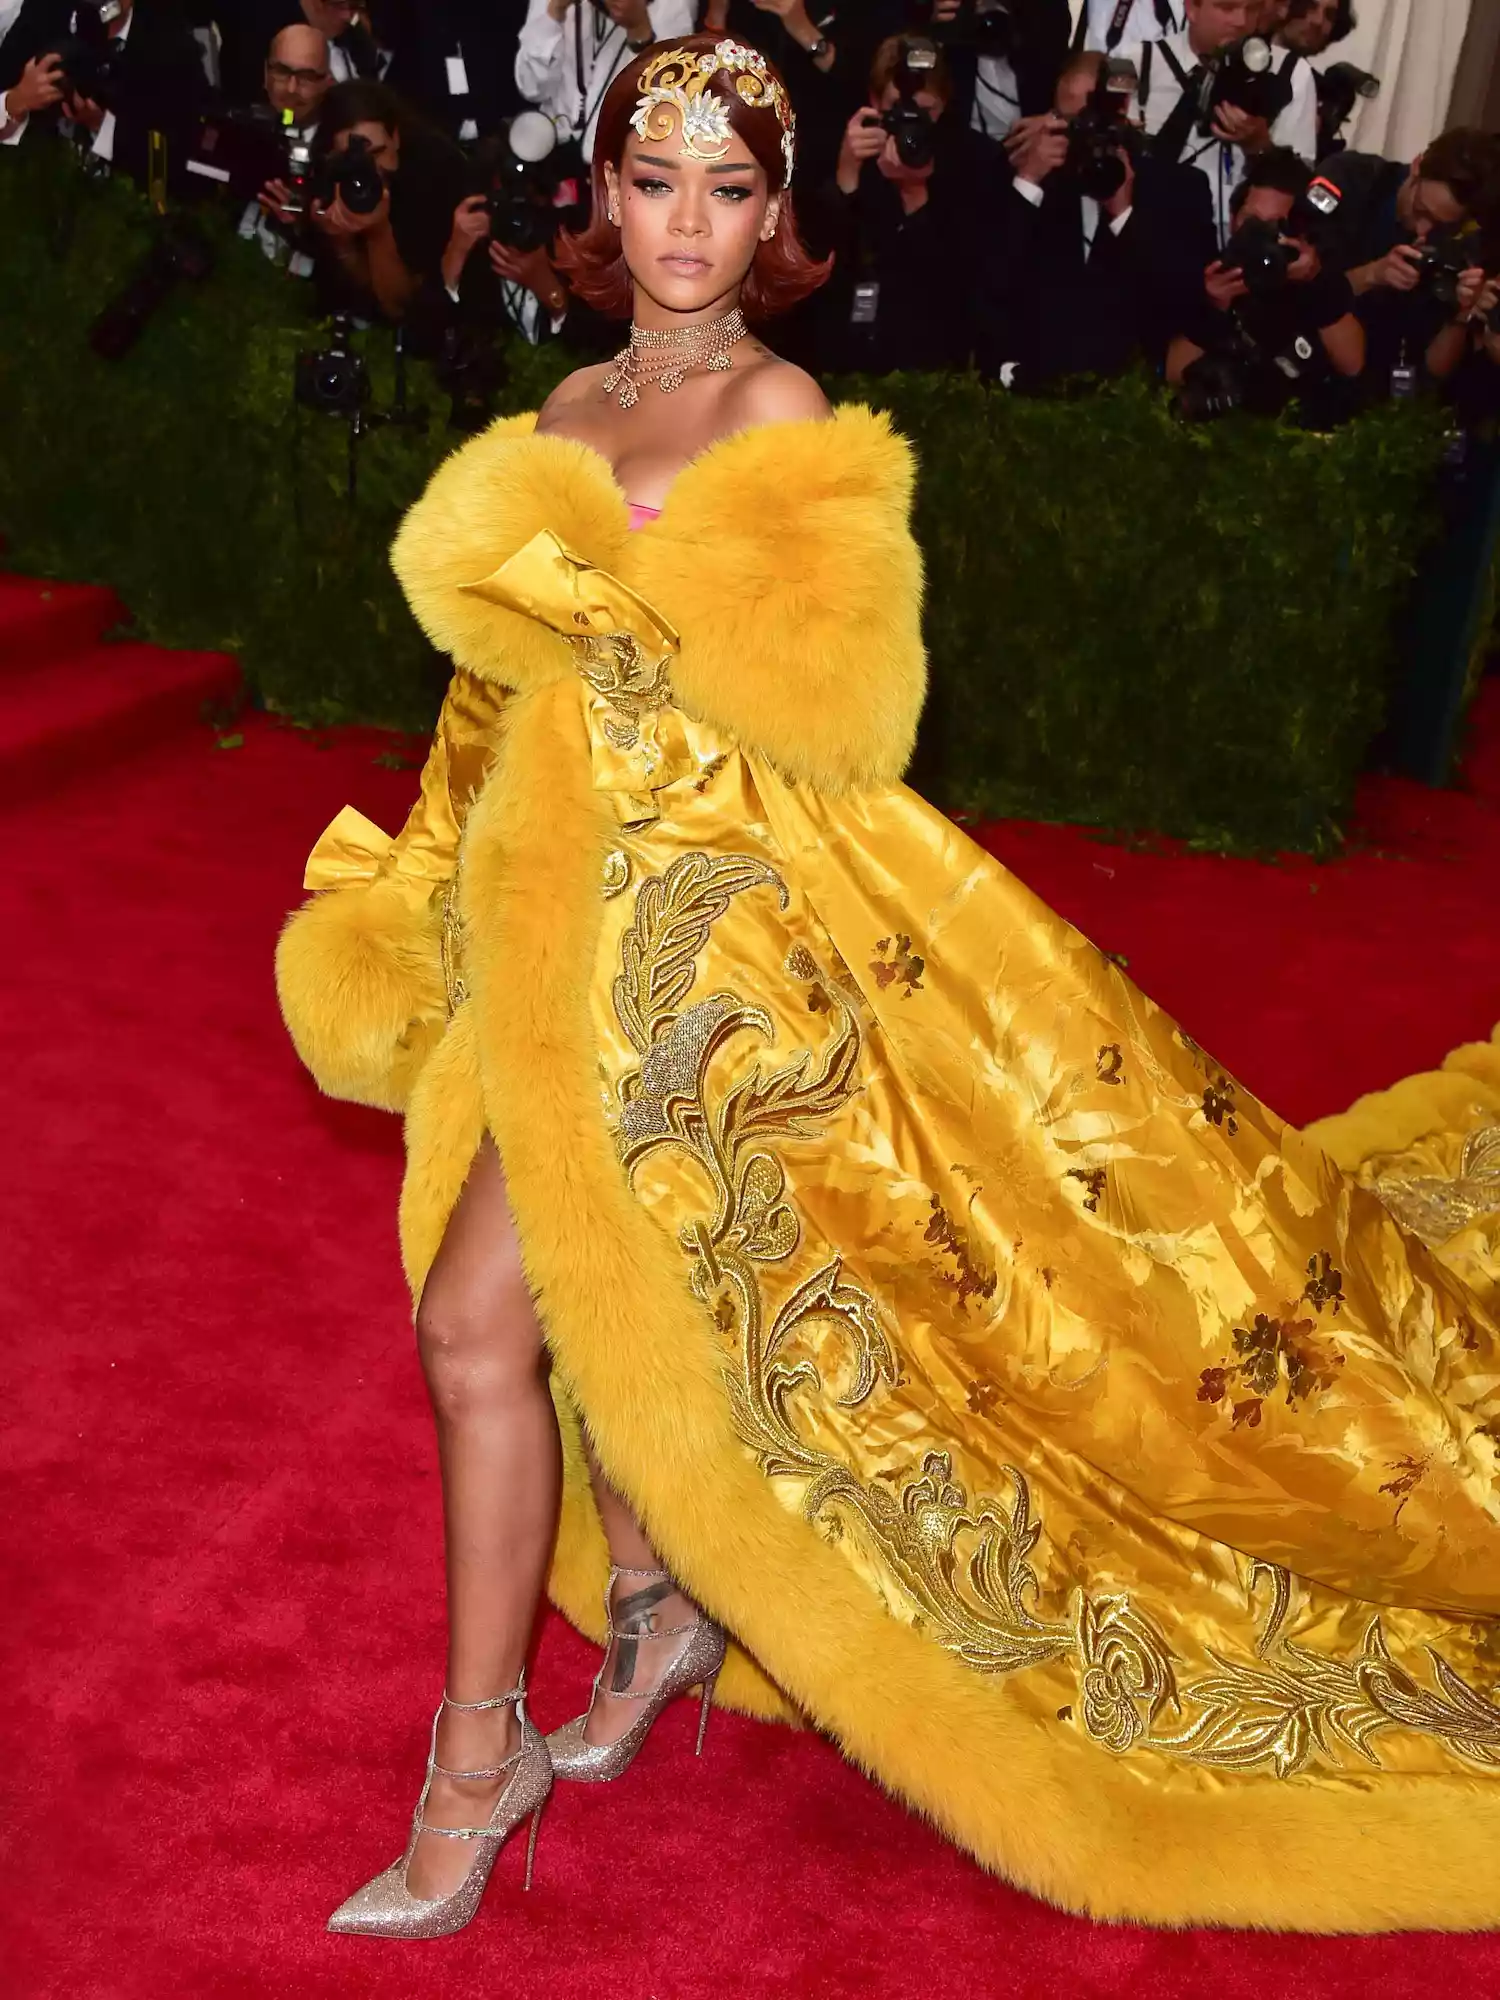 Rihanna wears a yellow Guo Pei gown with embroidery and long train to the 2015 Met Gala